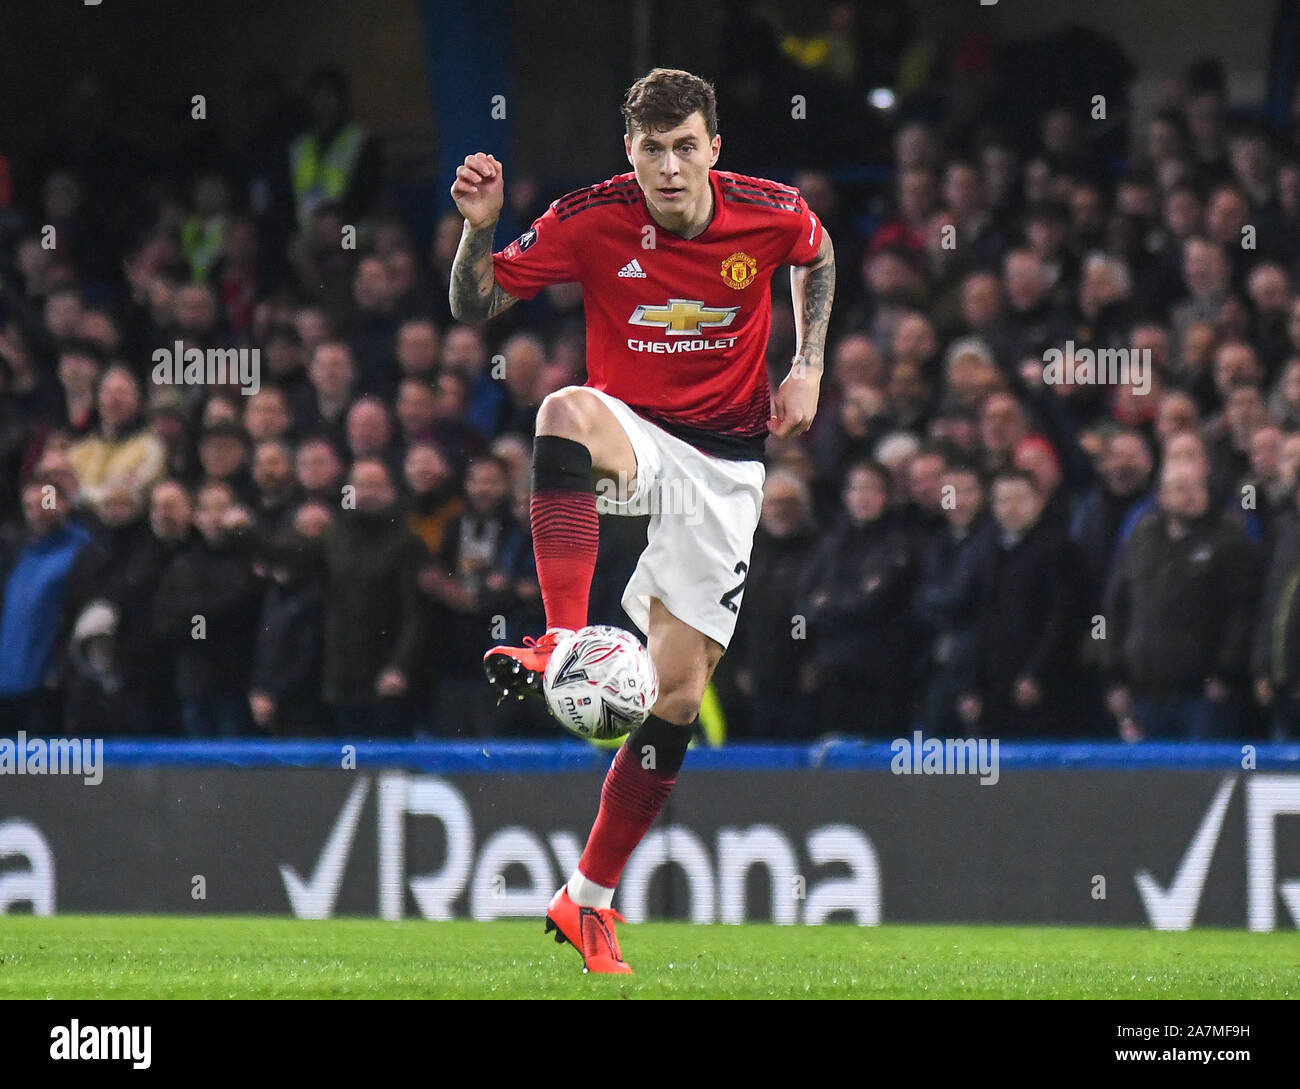 LONDON, ENGLAND - FEBRUARY 18, 2019: Victor Lindelof of Manchester pictured during the 2018/19 FA Cup Fifth Round game between Chelsea FC and Manchester United at Stamford Bridge. Stock Photo